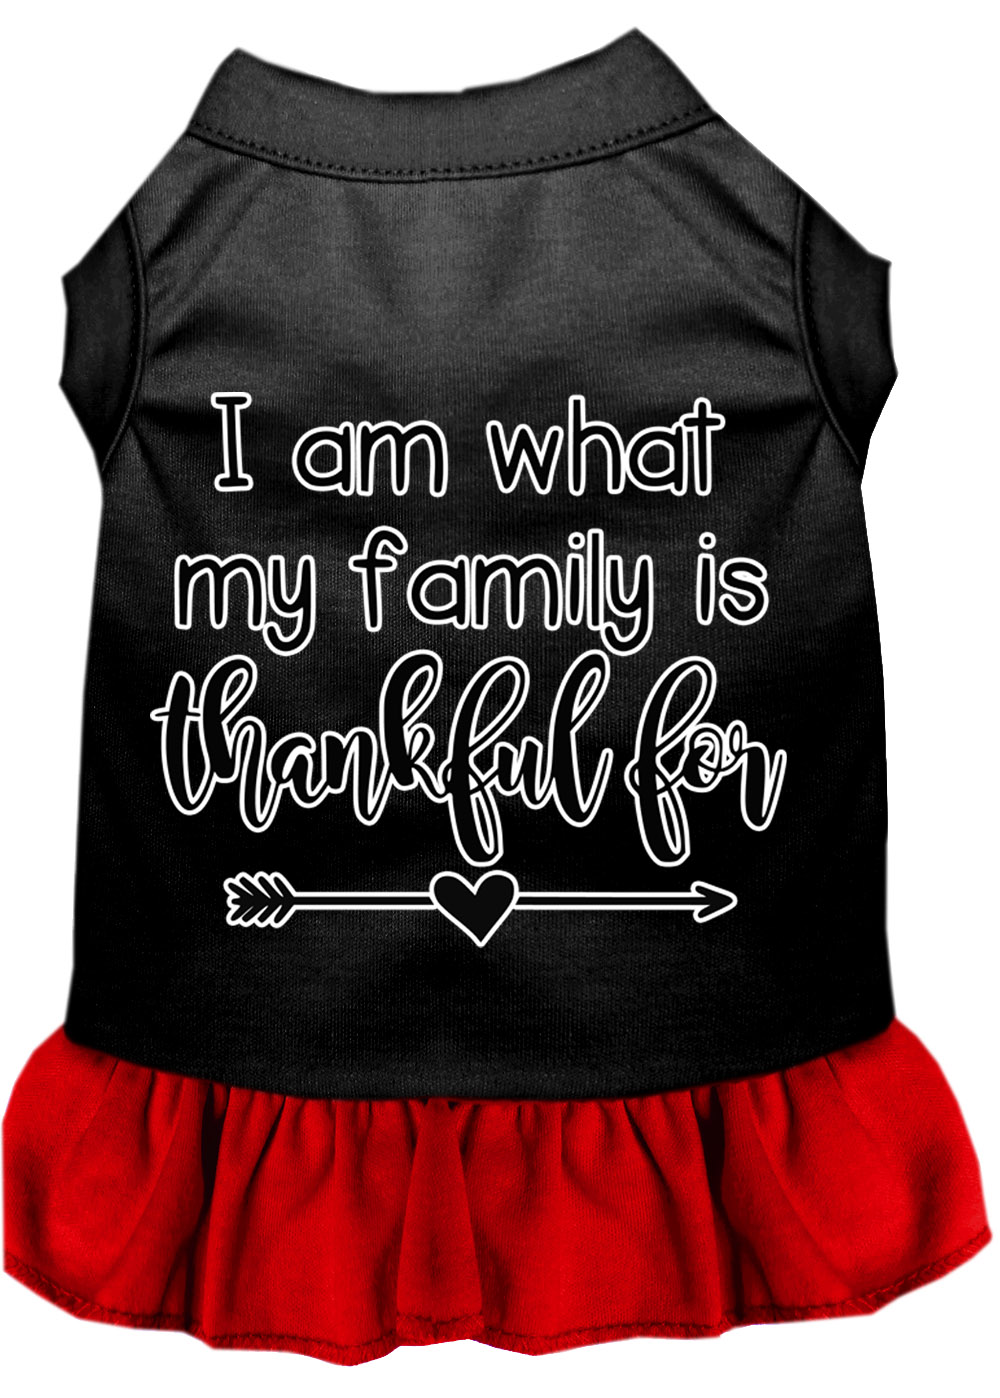 I Am What My Family is Thankful For Screen Print Dog Dress Black with Red Lg